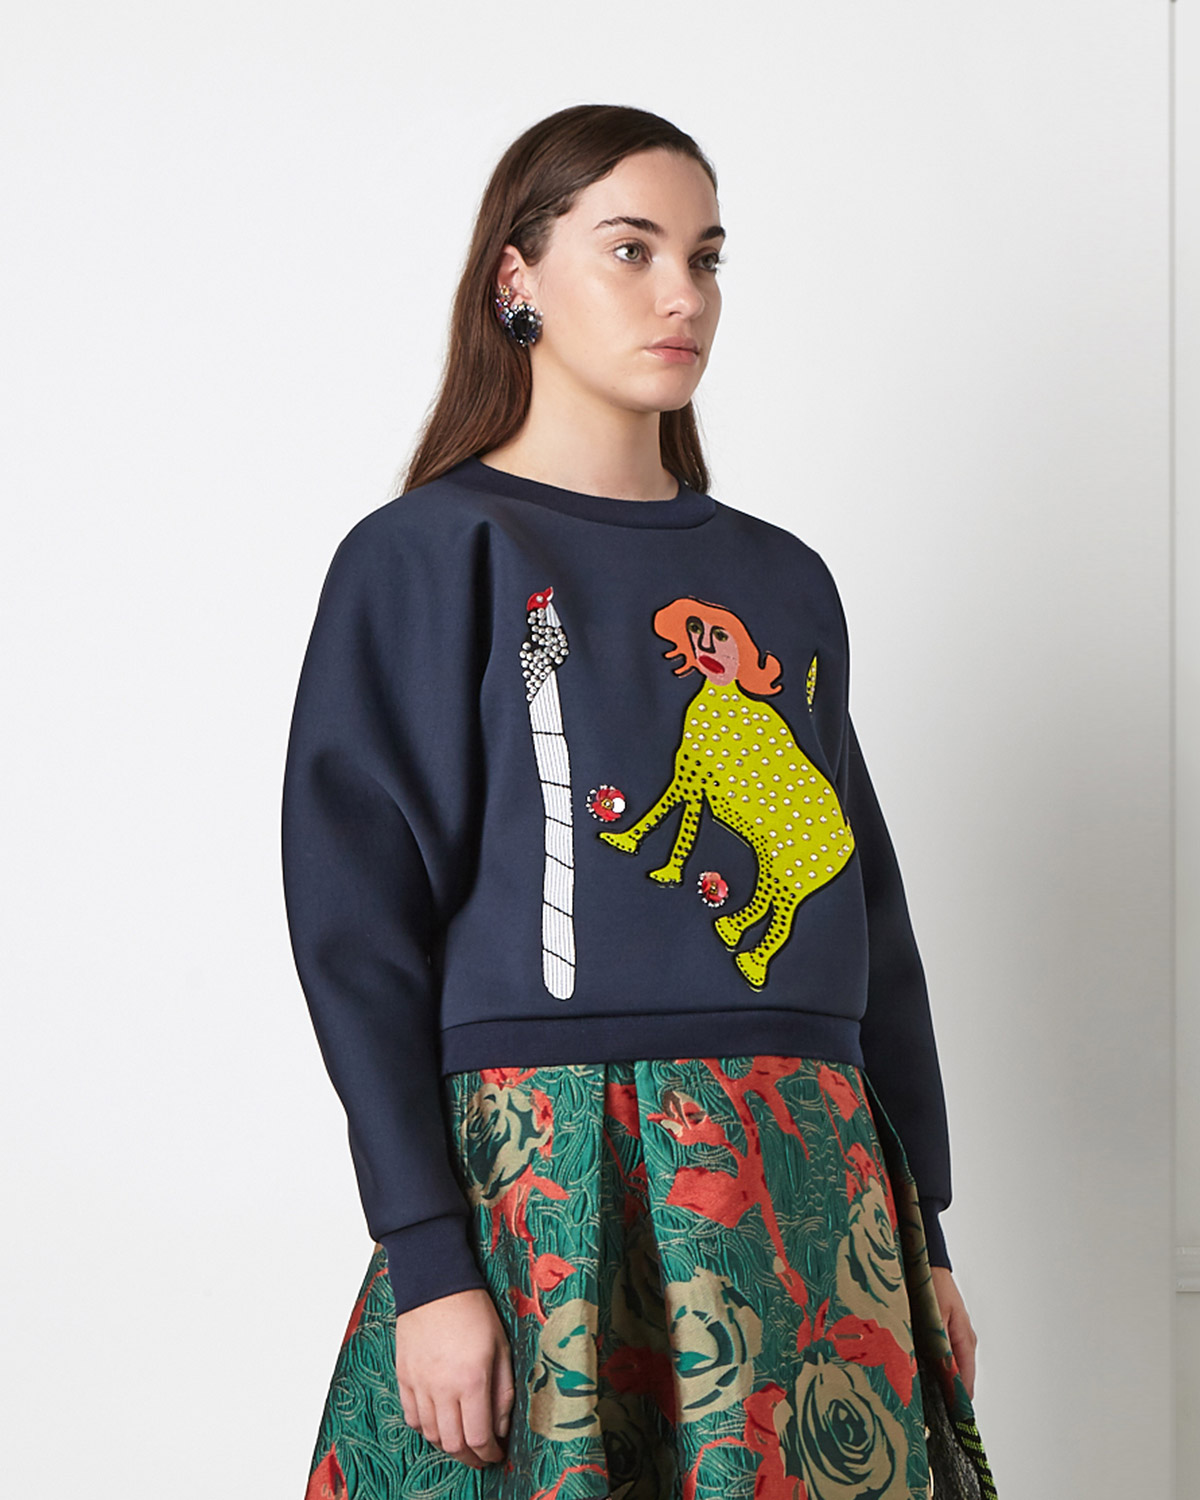 Dunnes Stores | Multi Joanne Hynes Tiger Lady Sweater